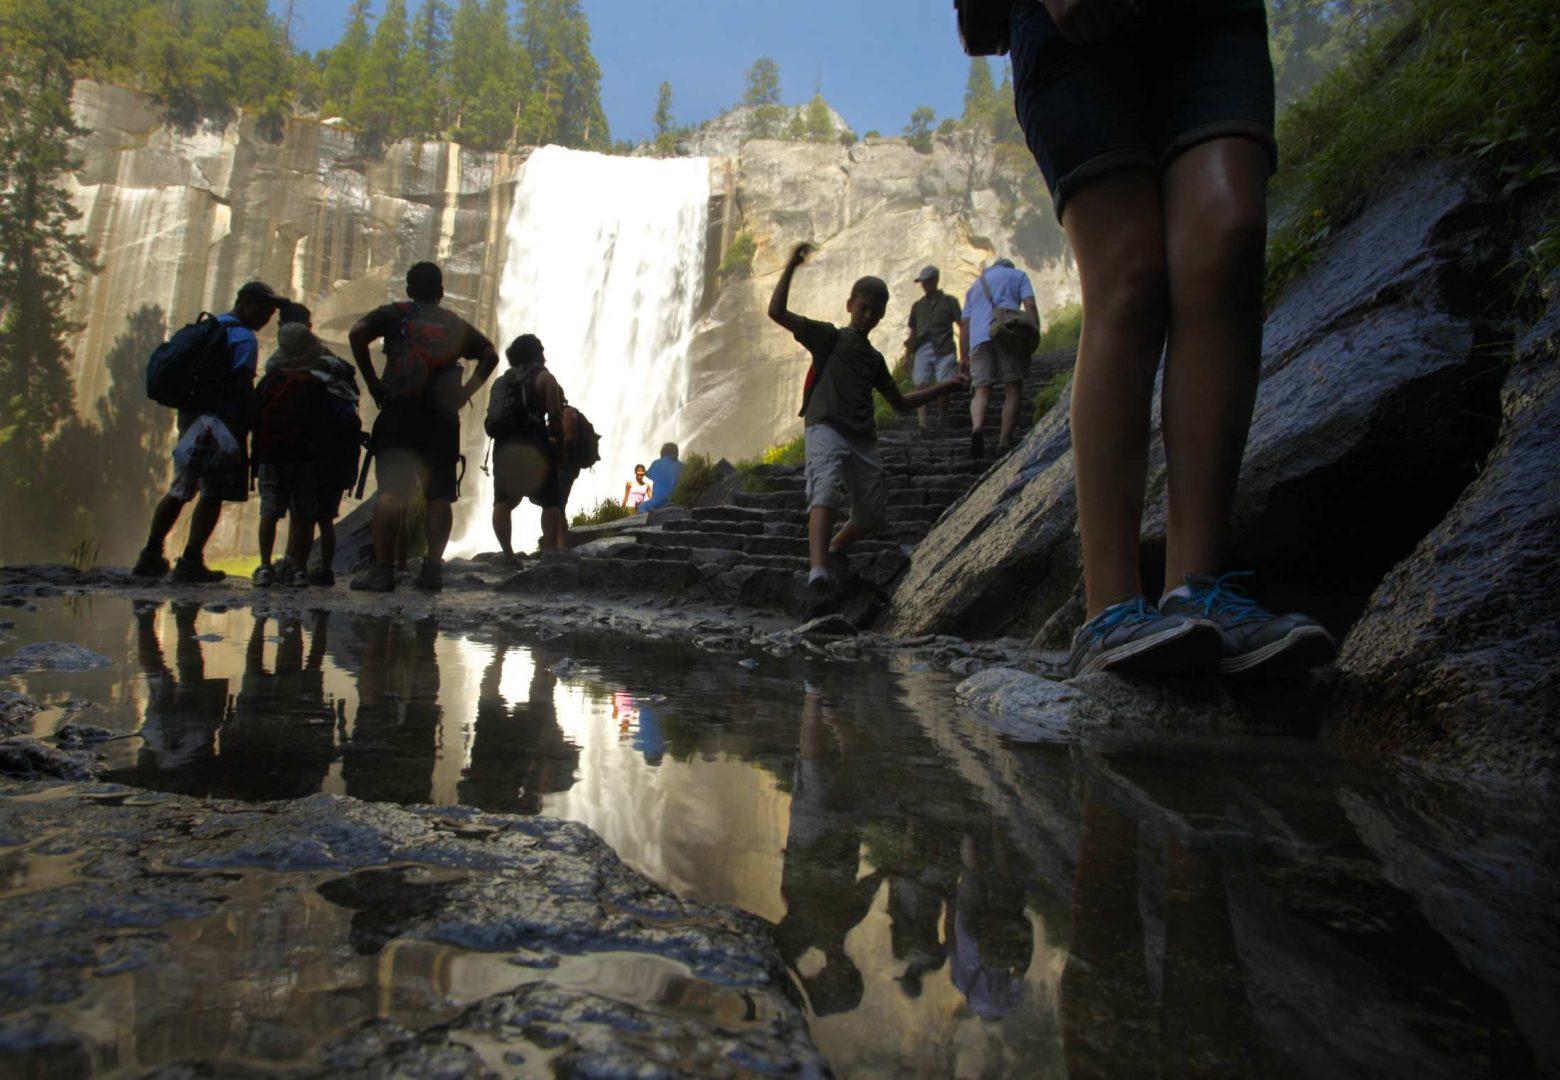 Hikers+slop+around+on+the+wet+rocks+on+the+Mist+Trail%2C+which+leads+to+Vernal+Fall+at+Yosemite+National+Park+in+California+on+August+5%2C+2011.++%28Mark+Boster%2FLos+Angeles+Times%2FMCT%29